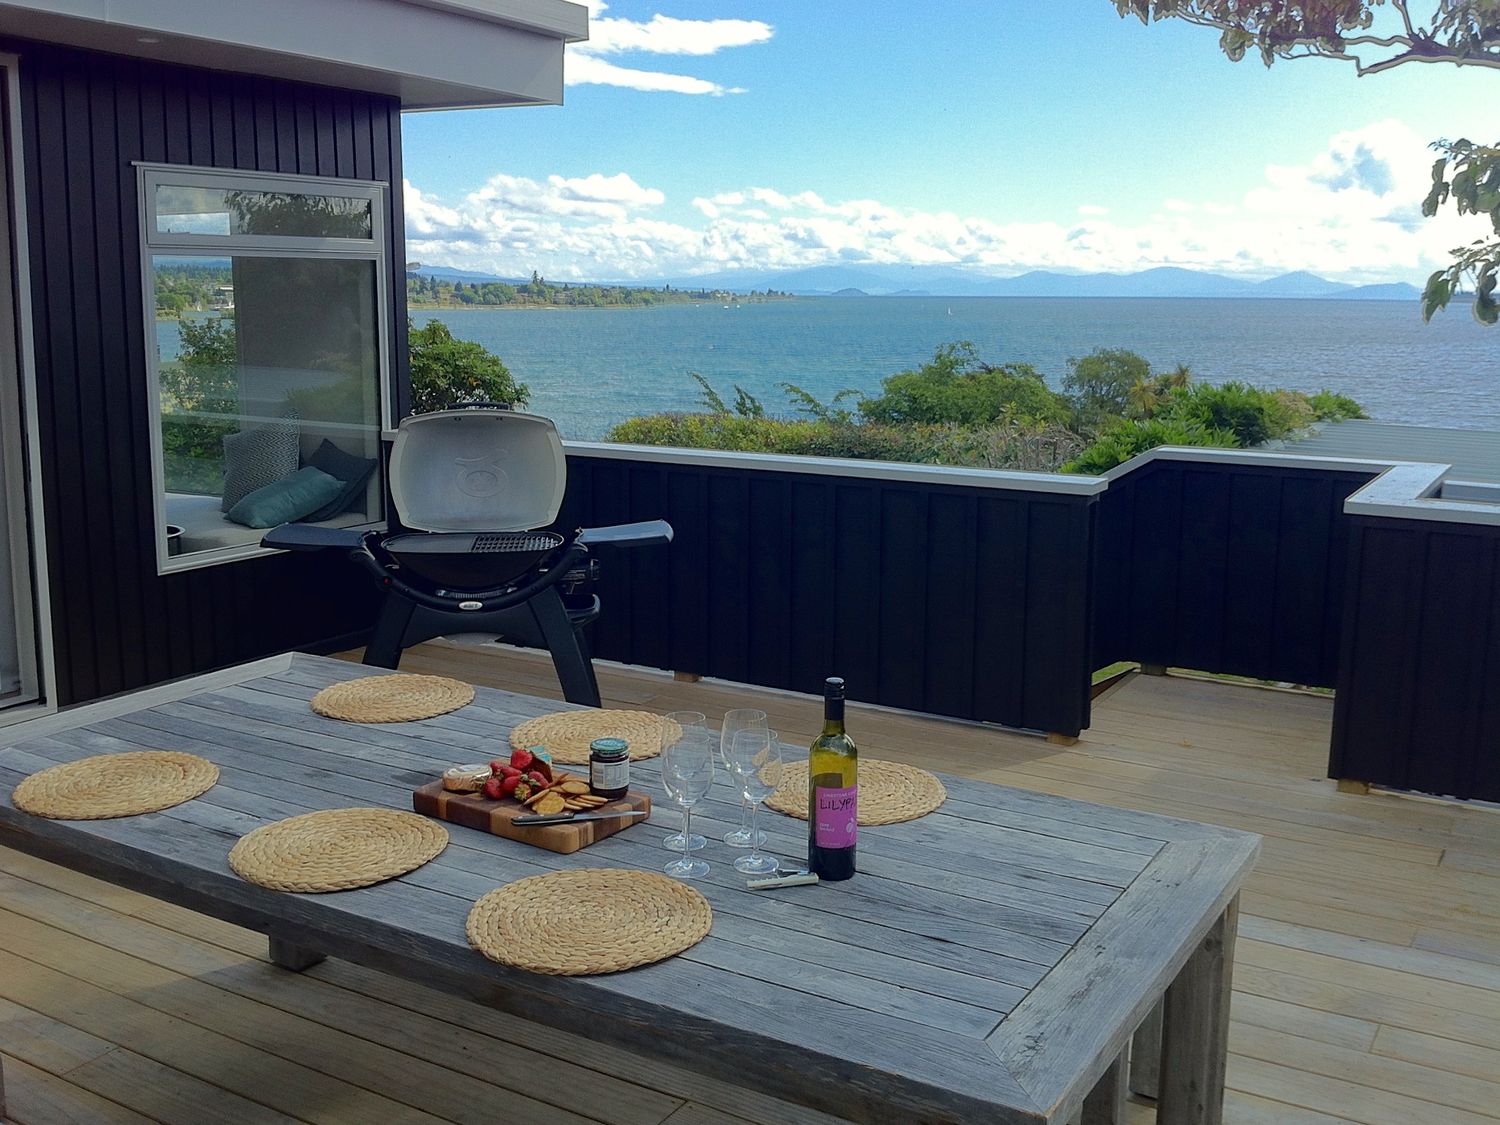 Lakeview House - Taupo Holiday Home -  - 1030986 - photo 1